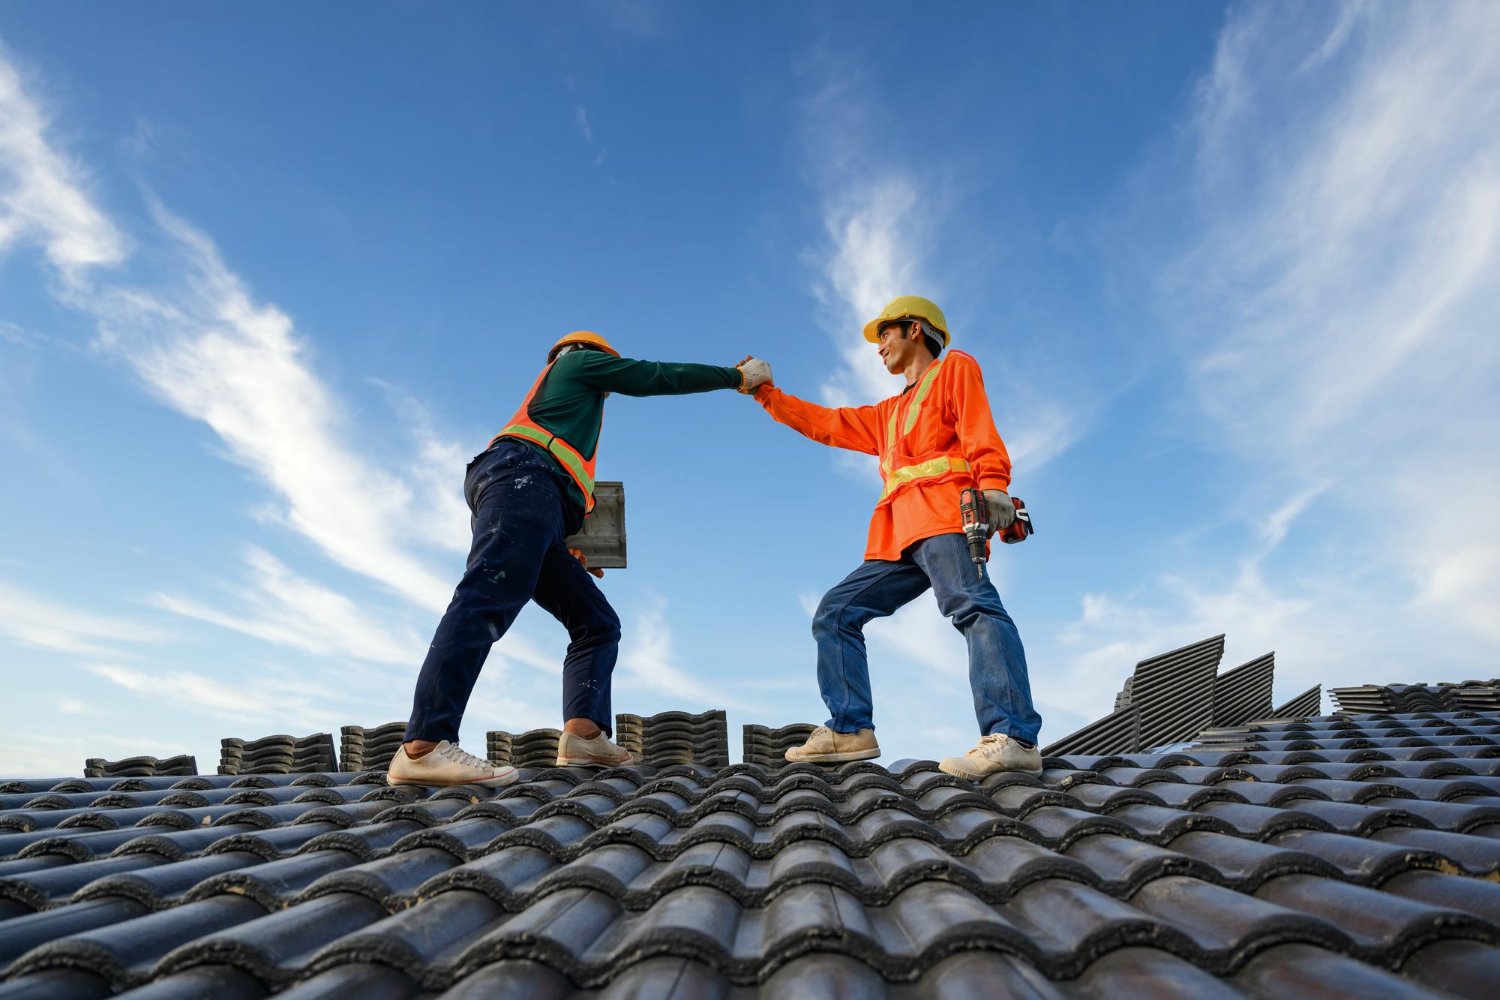 From Tiles to Triumph: Your Roofing Expertise